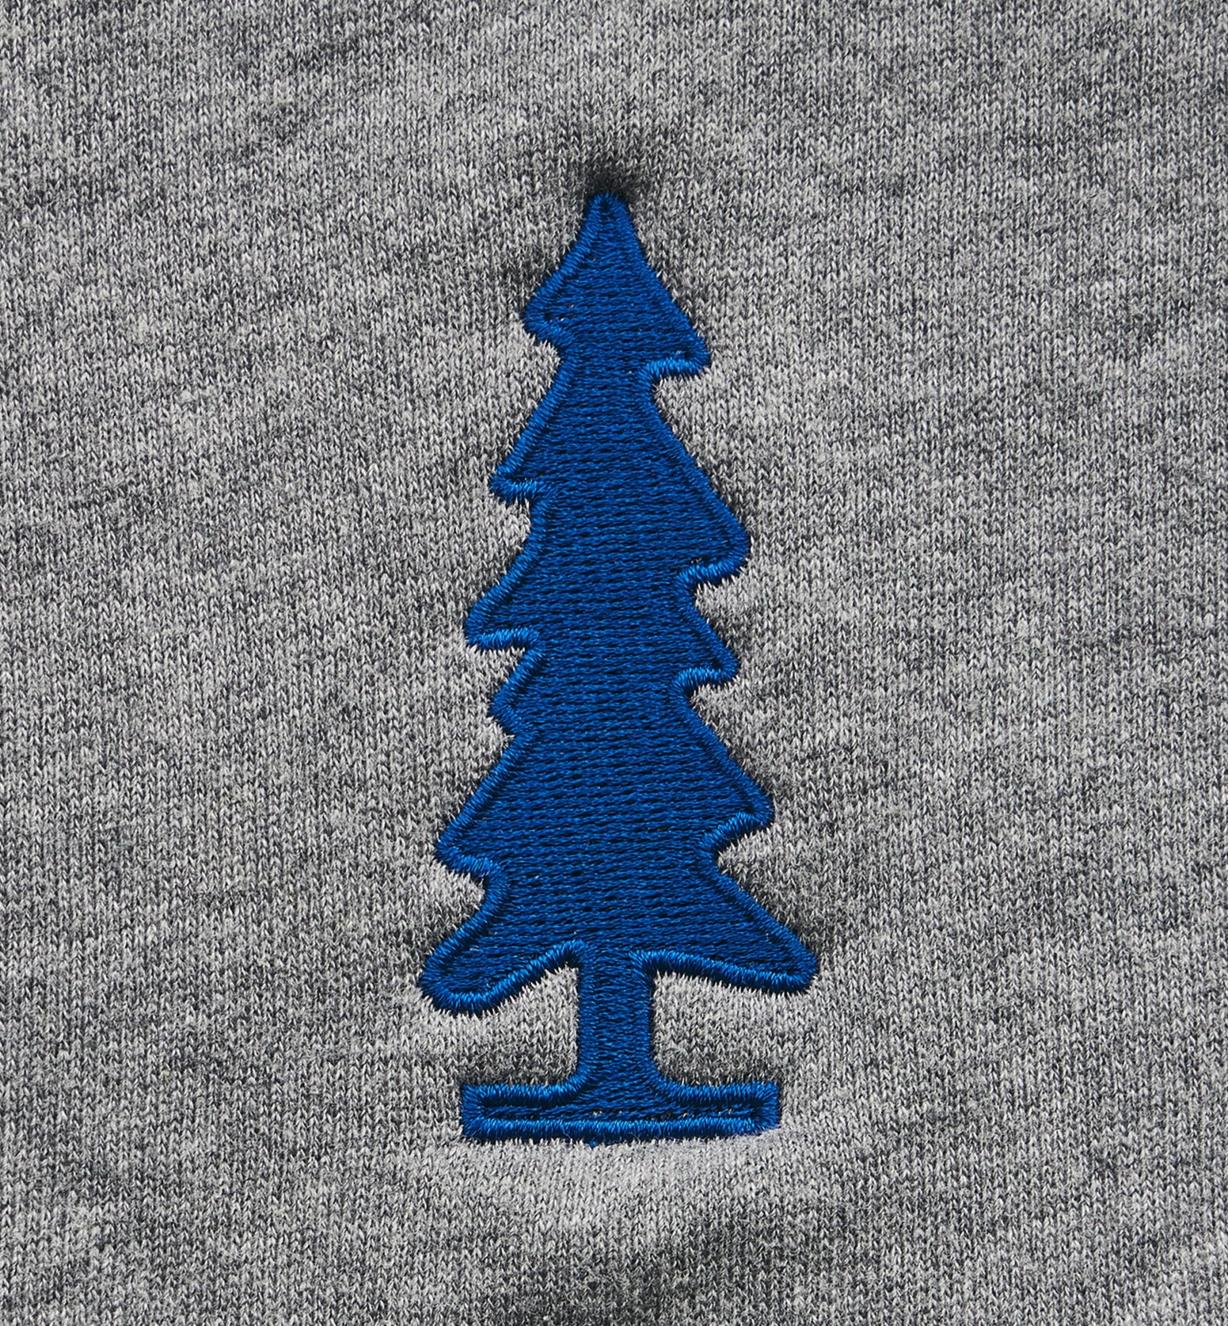 Close-up of embroidered tree on front of sweatshirt